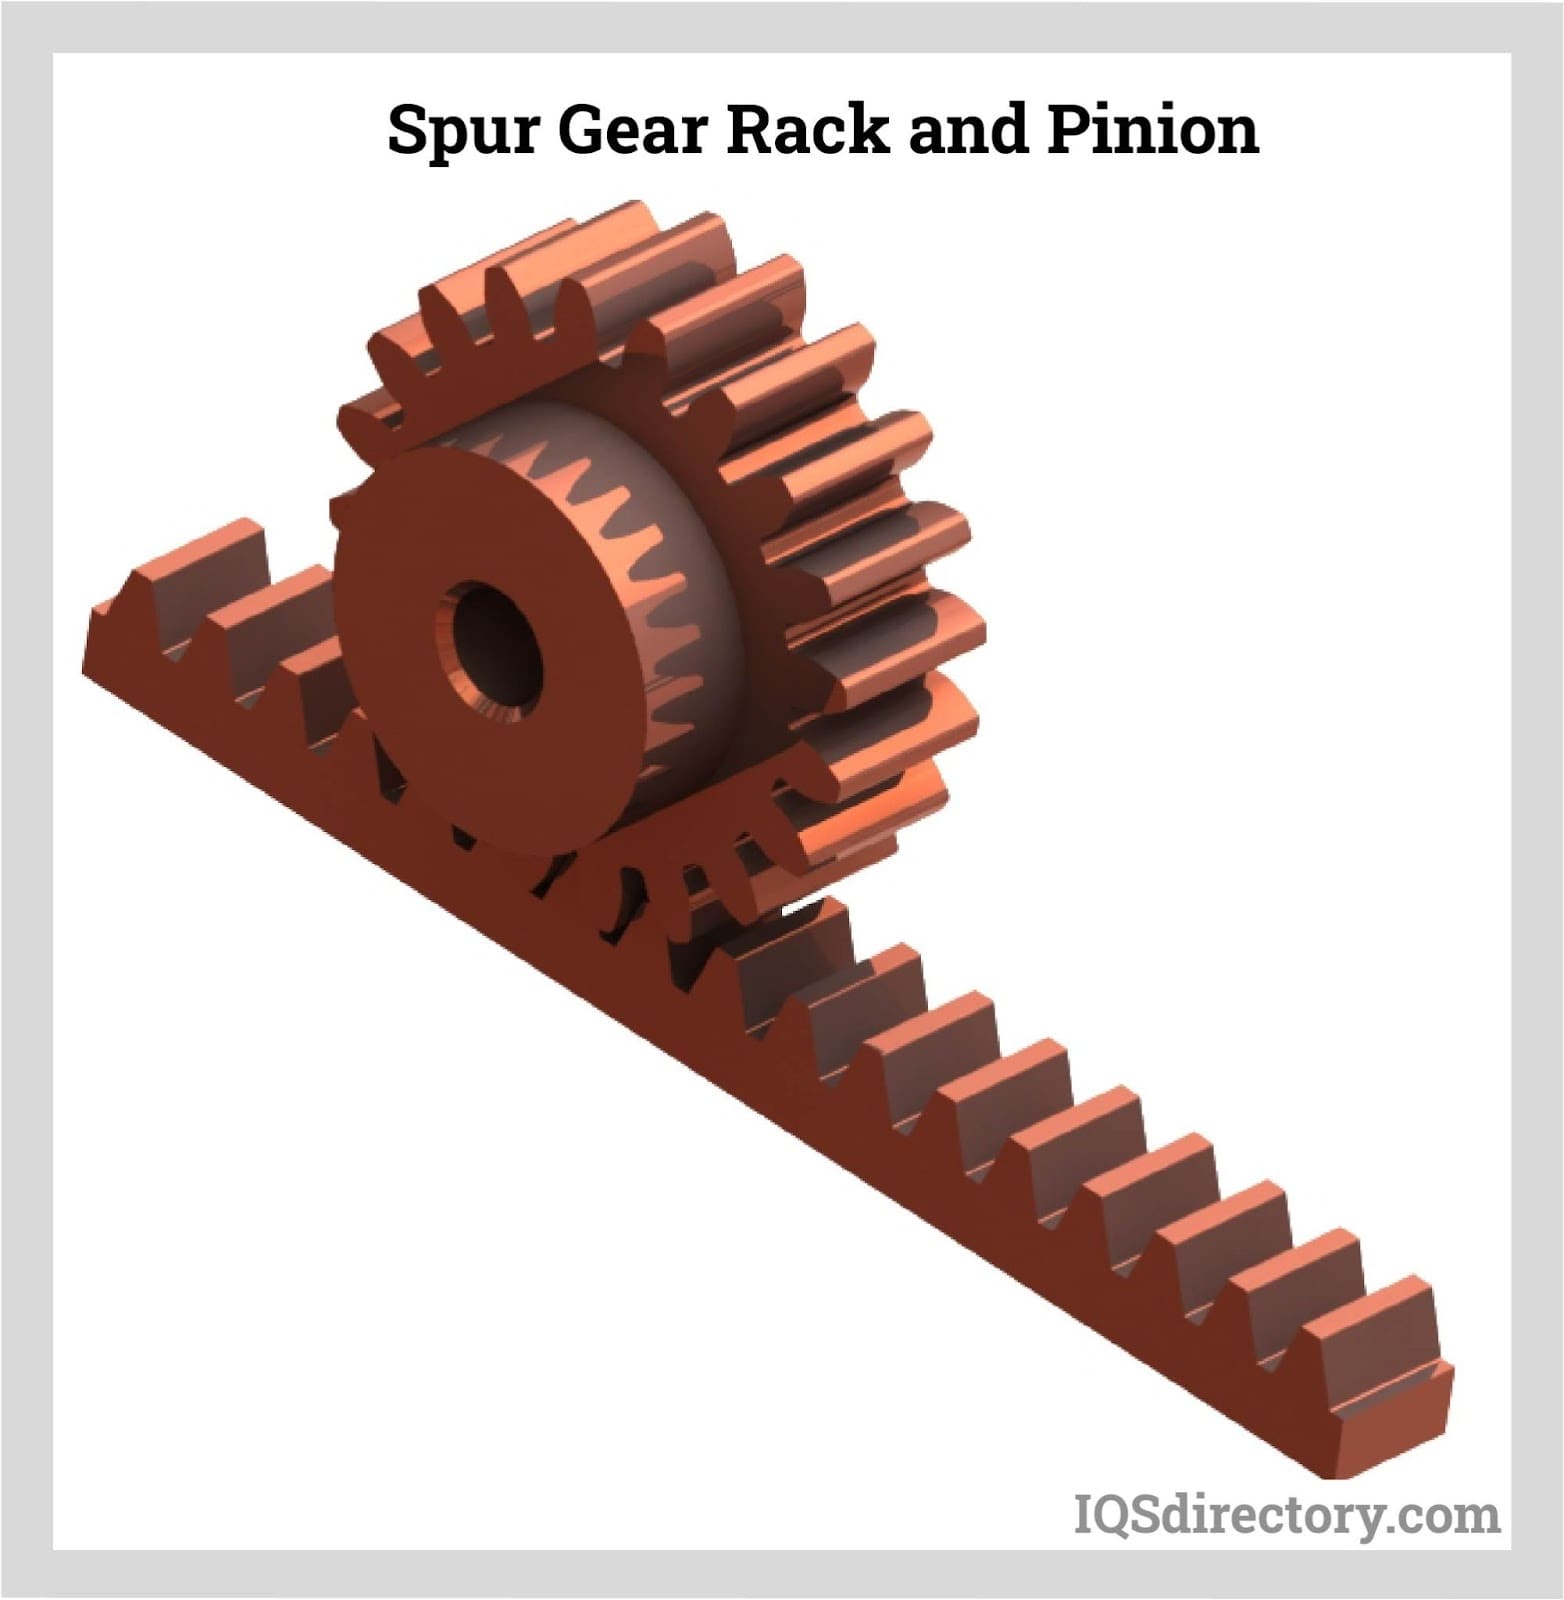 Spur Gear Rack and Pinion